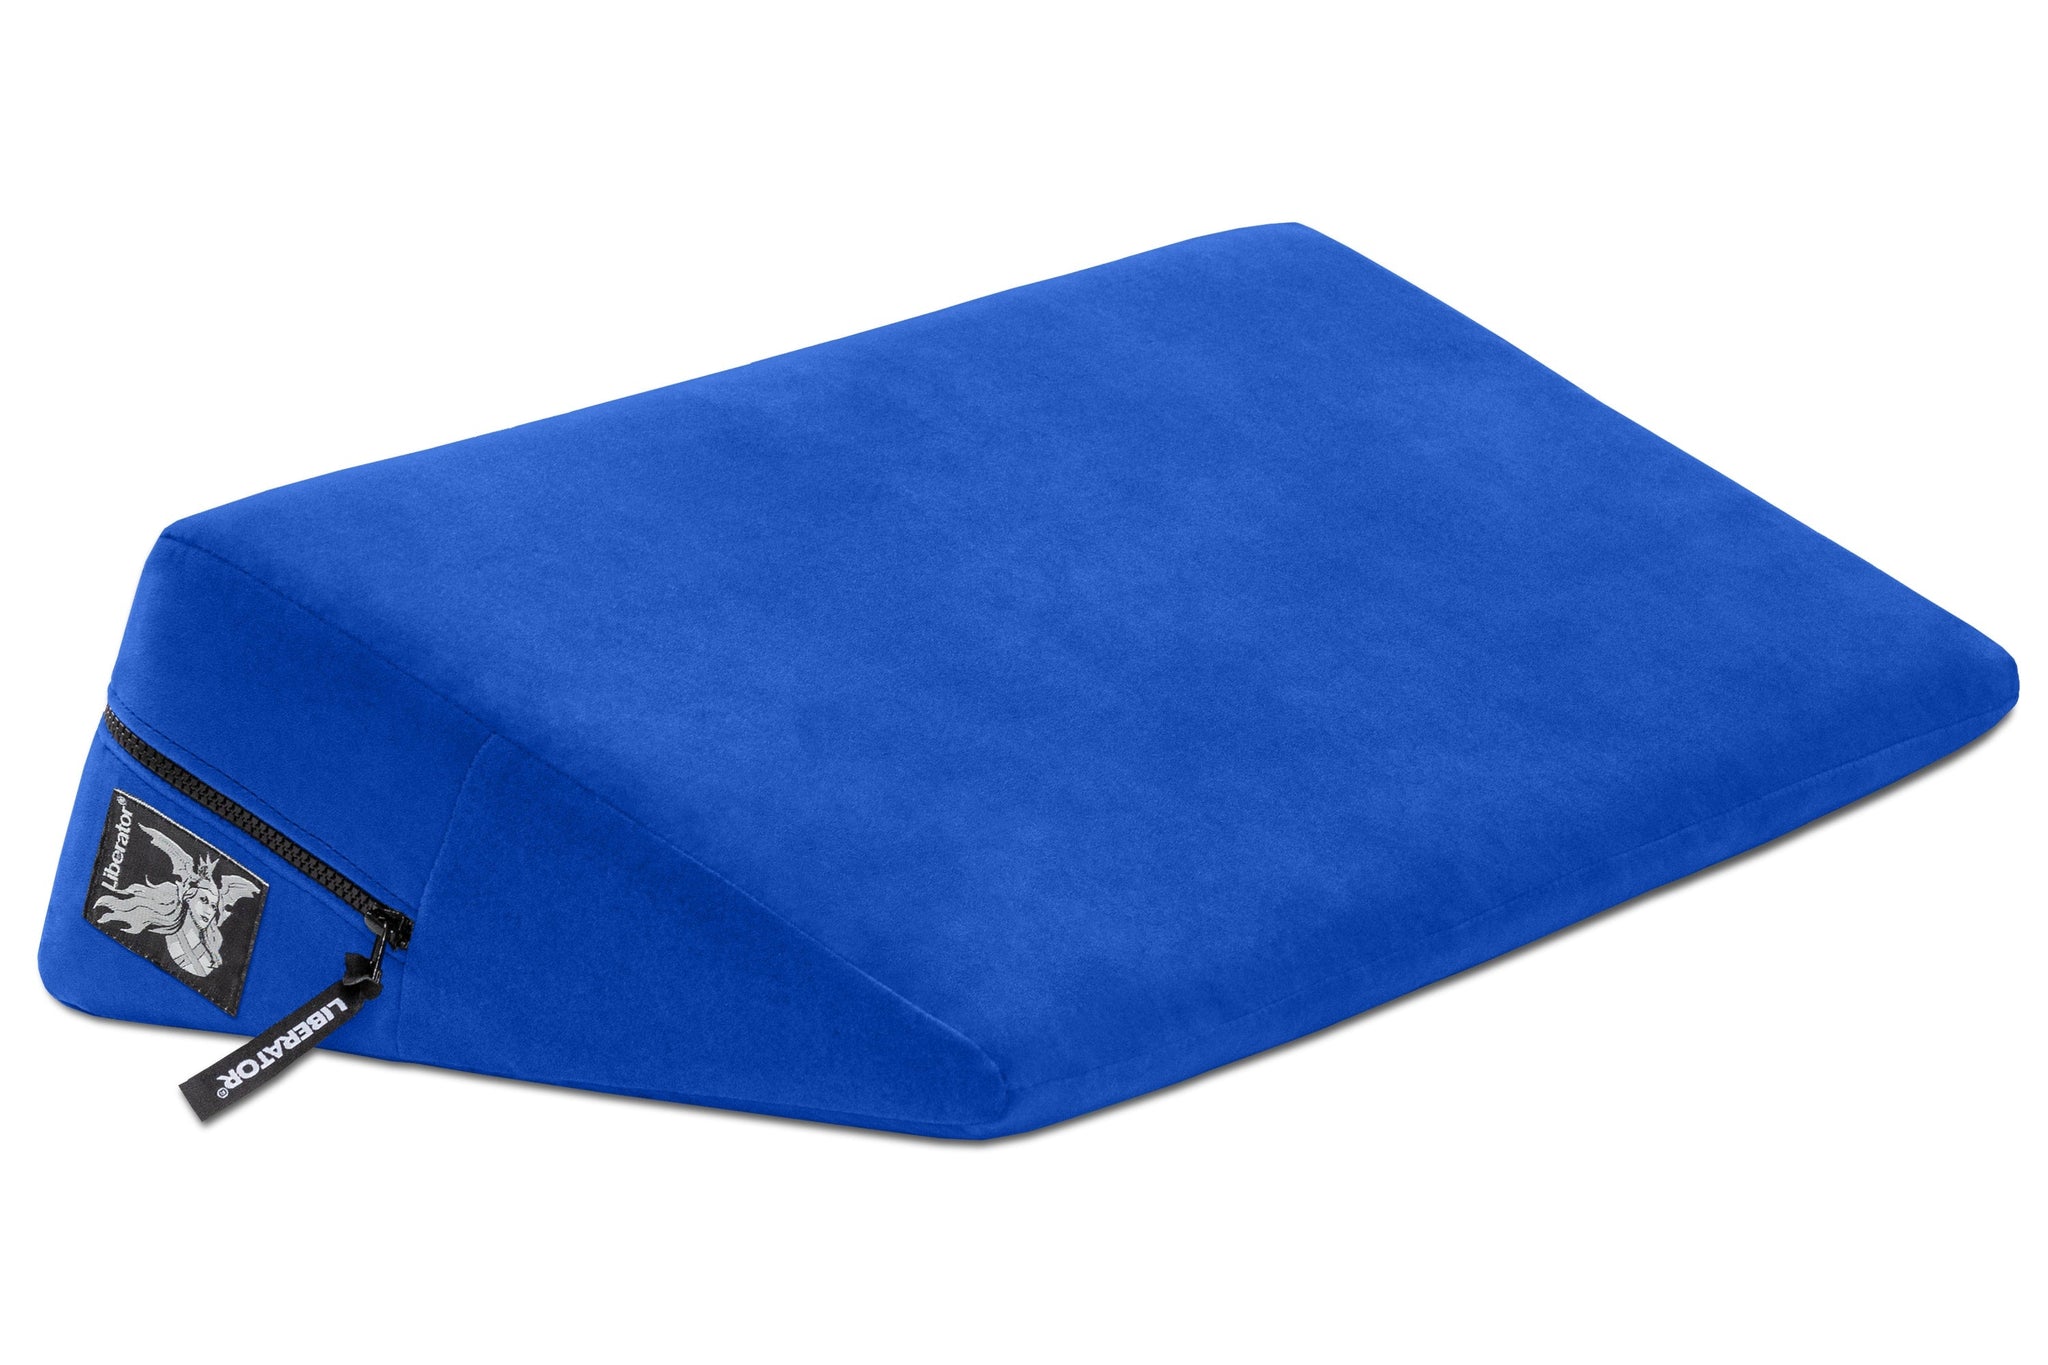 Blue-liberator wedge pillow-with removable cloth cover